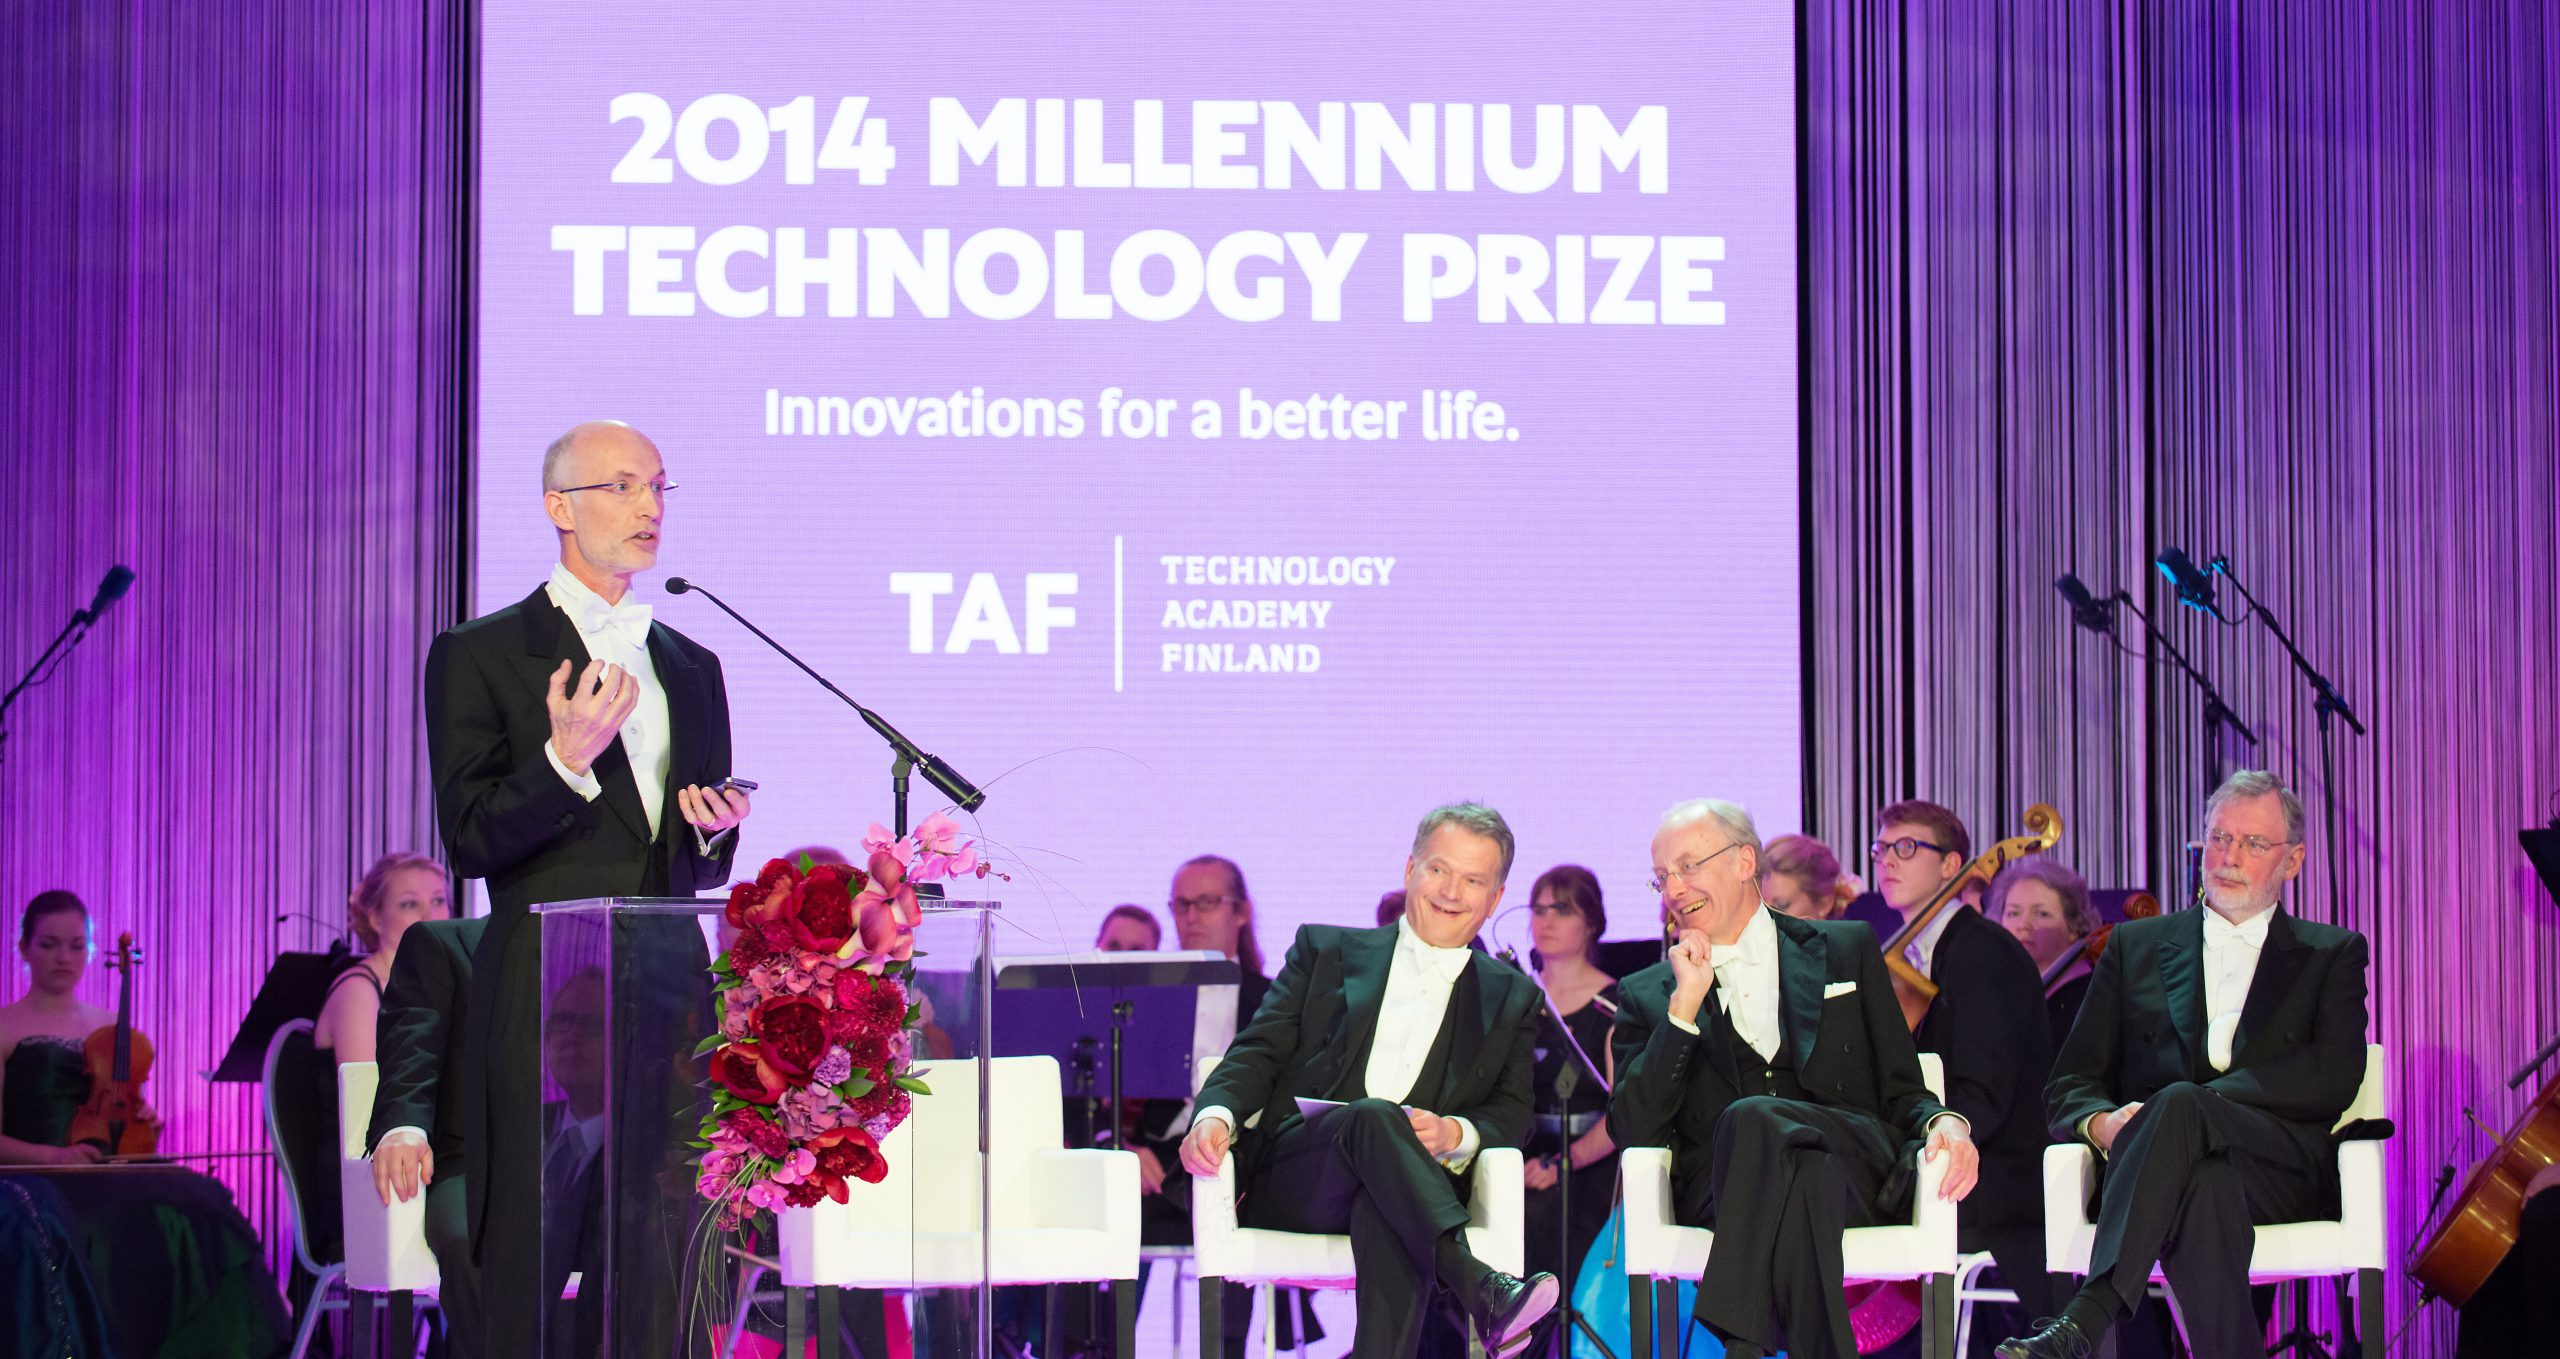 In this picture 2014 Millennium Technology Prize Winner Stuart Parkin giving his speech at prize award ceremony